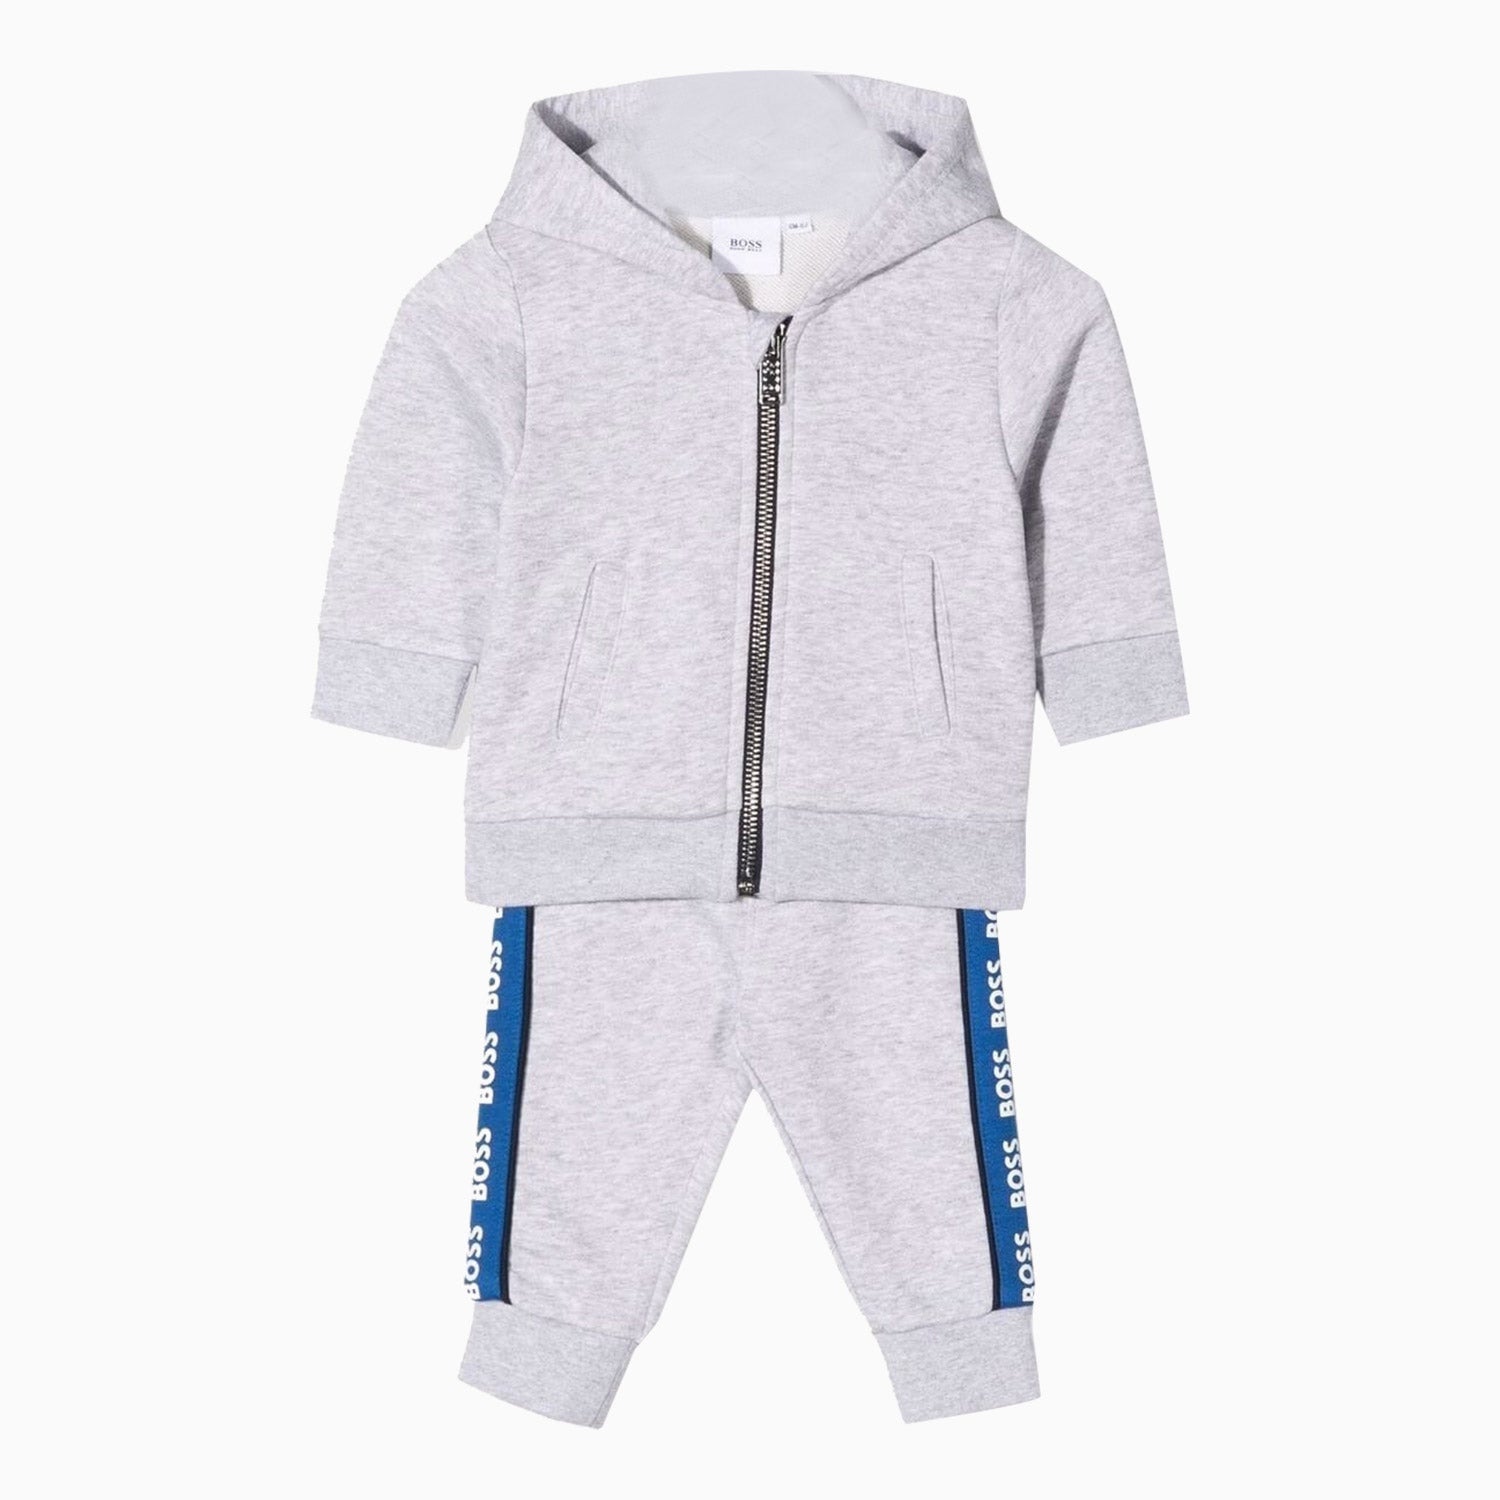 Hugo Boss Kid's French Terry Track Suit - Color: Chine Grey - Kids Premium Clothing -